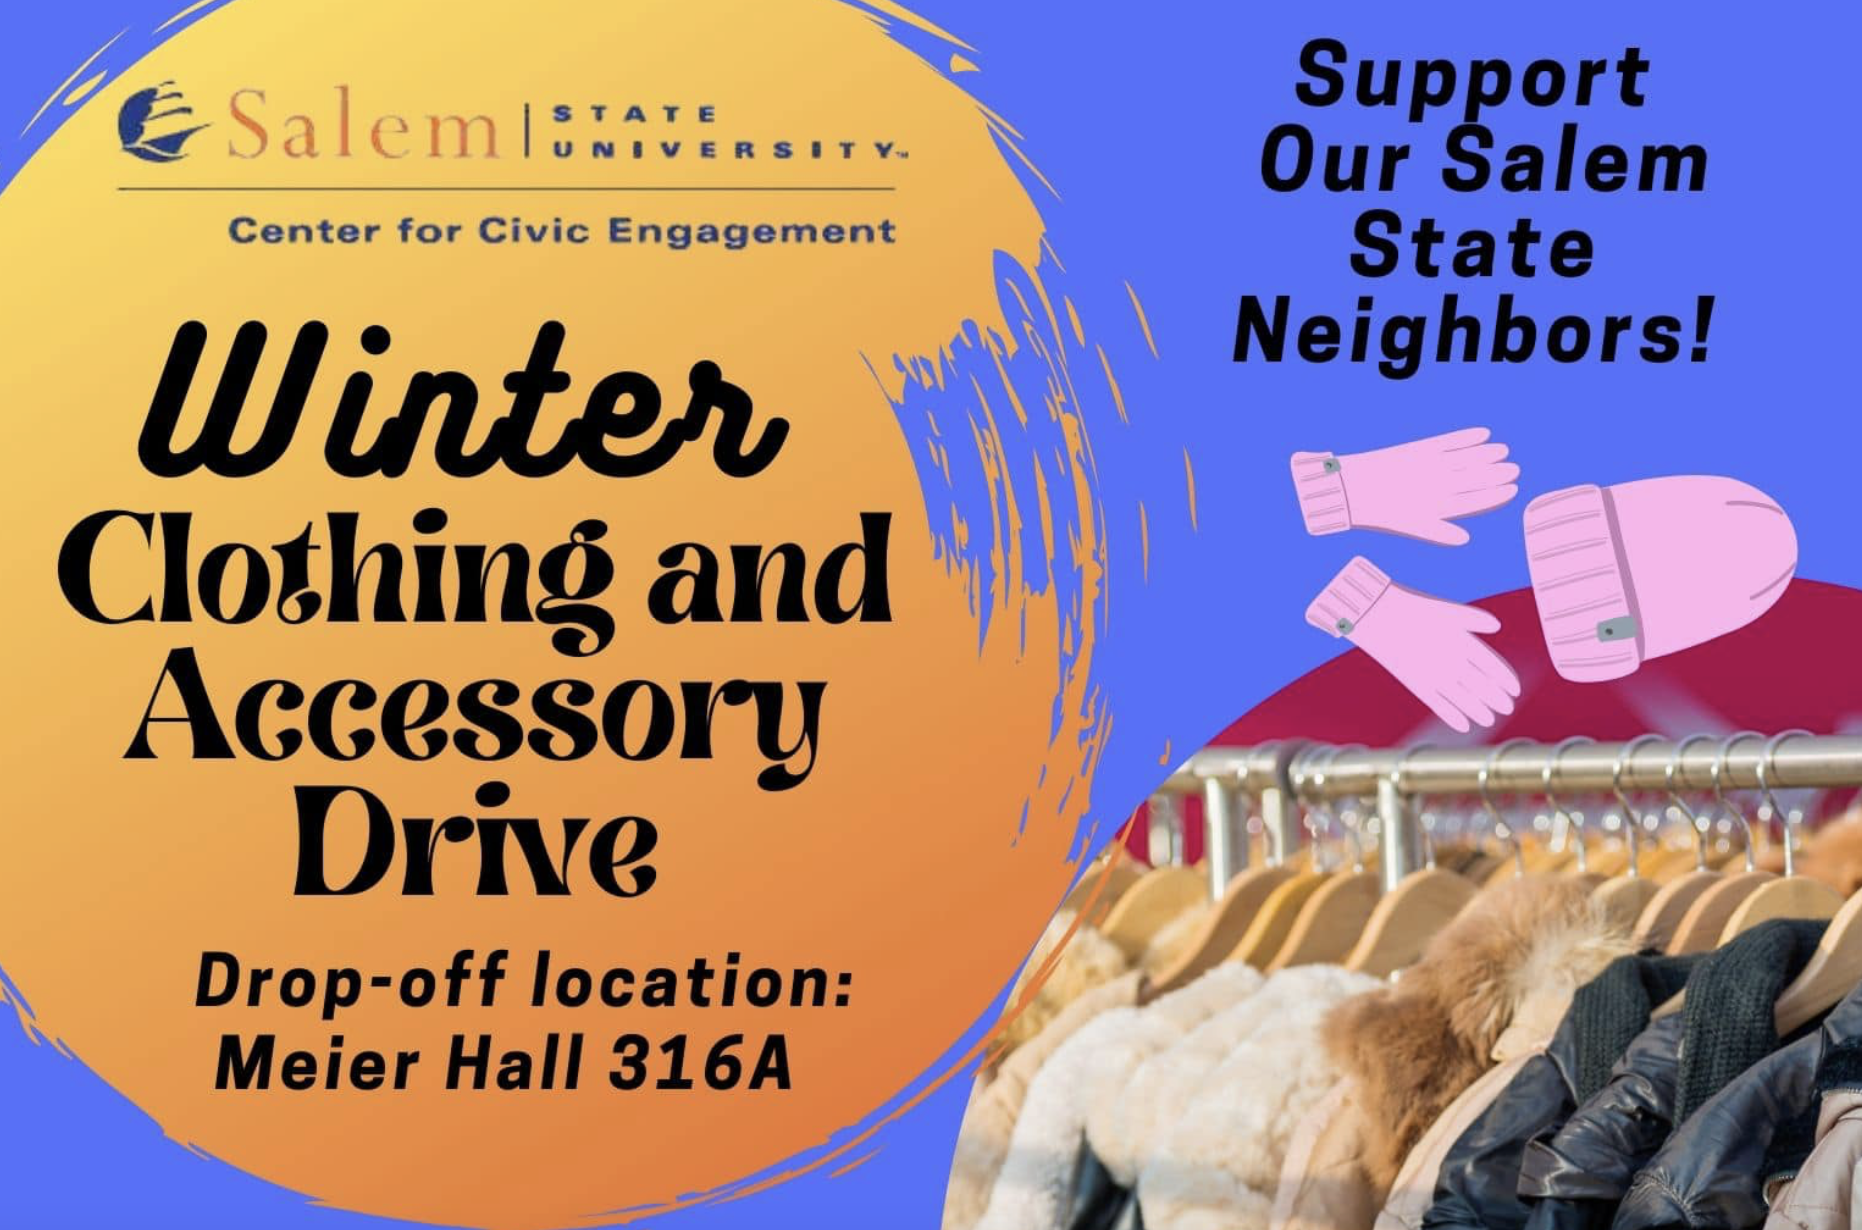 Please consider donating new or used items to families in need of winter clothi…